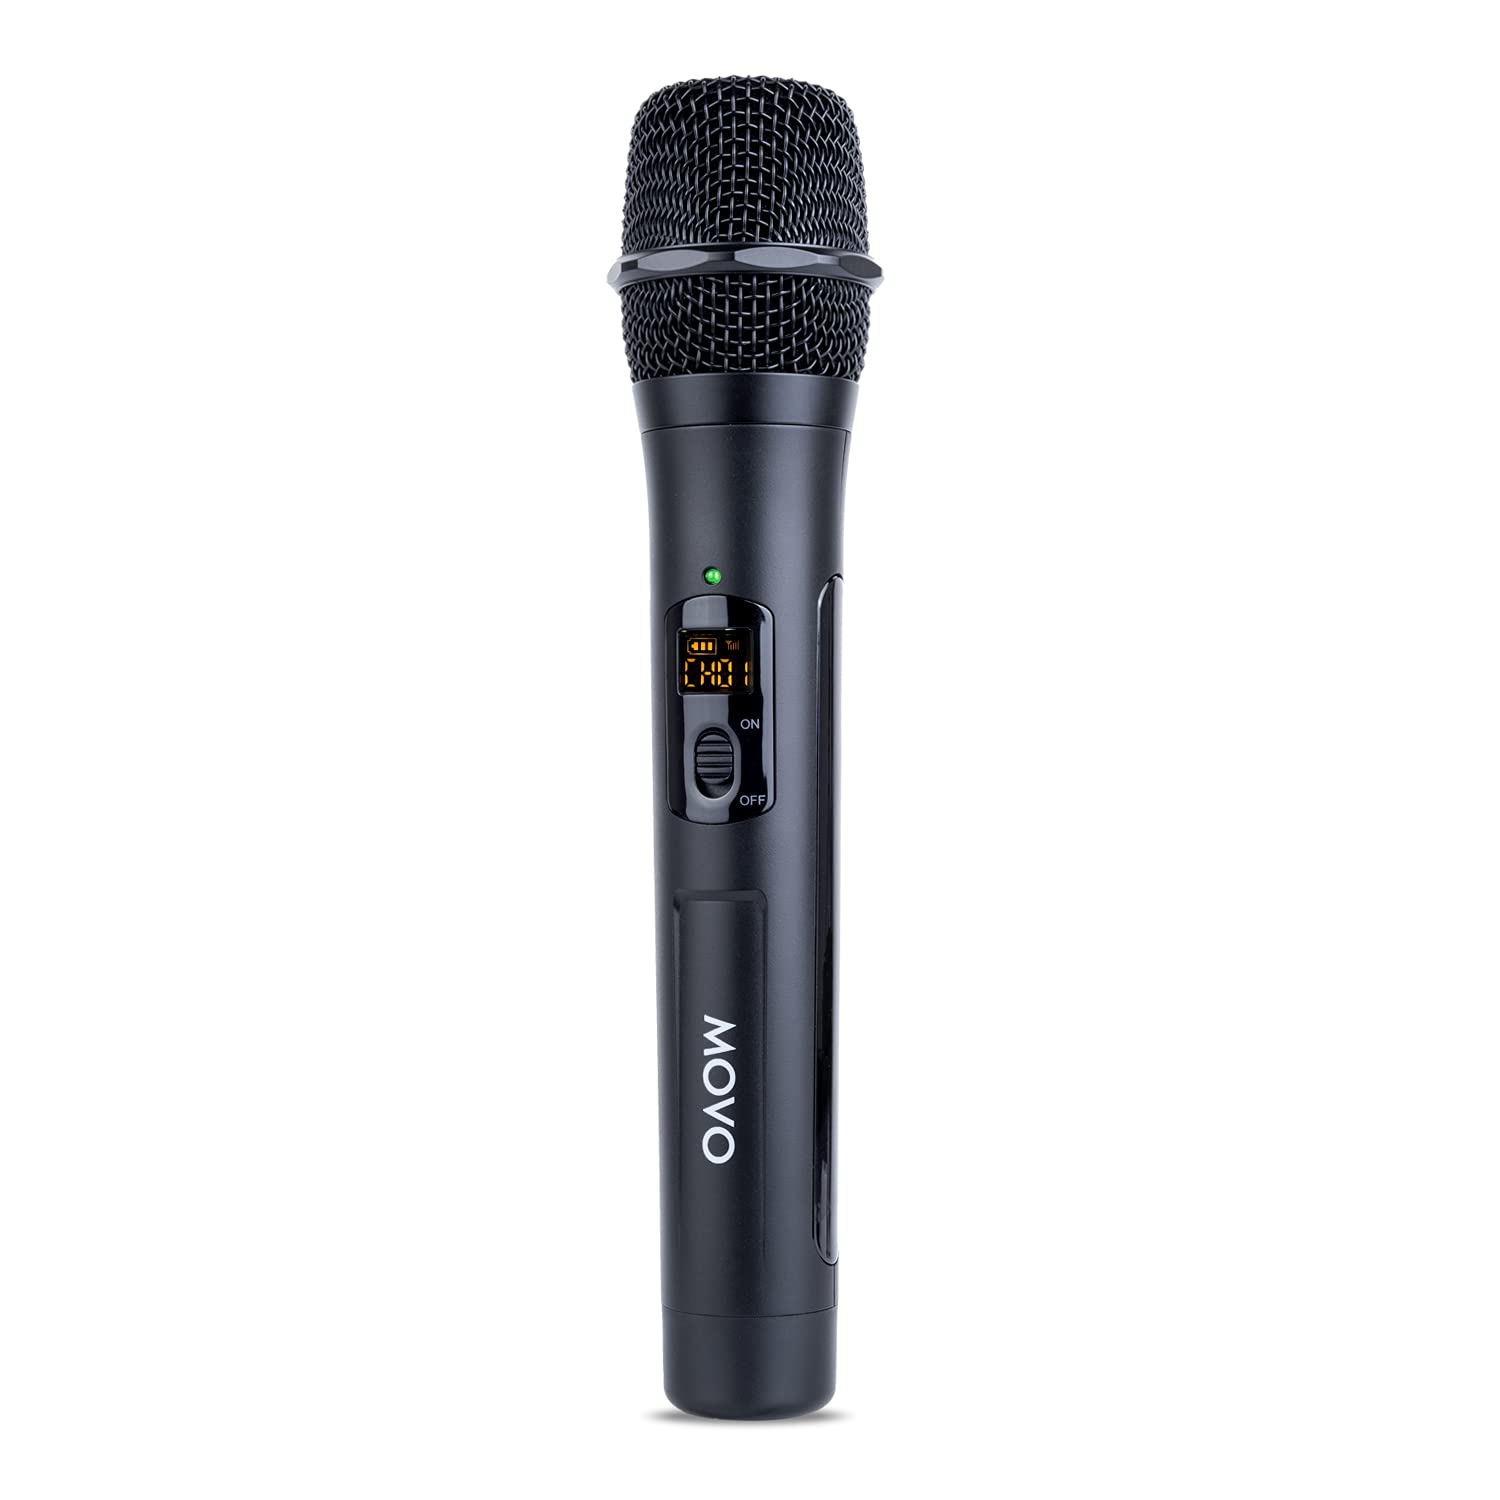 Movo WMX-7-TH VHF Portable Handheld Microphone Transmitter for The WMX-7 Wireless Microphone System - 12-Channel Wireless Mic Best Wireless Microphones for Weddings, Interviews, Presentations  - Very Good